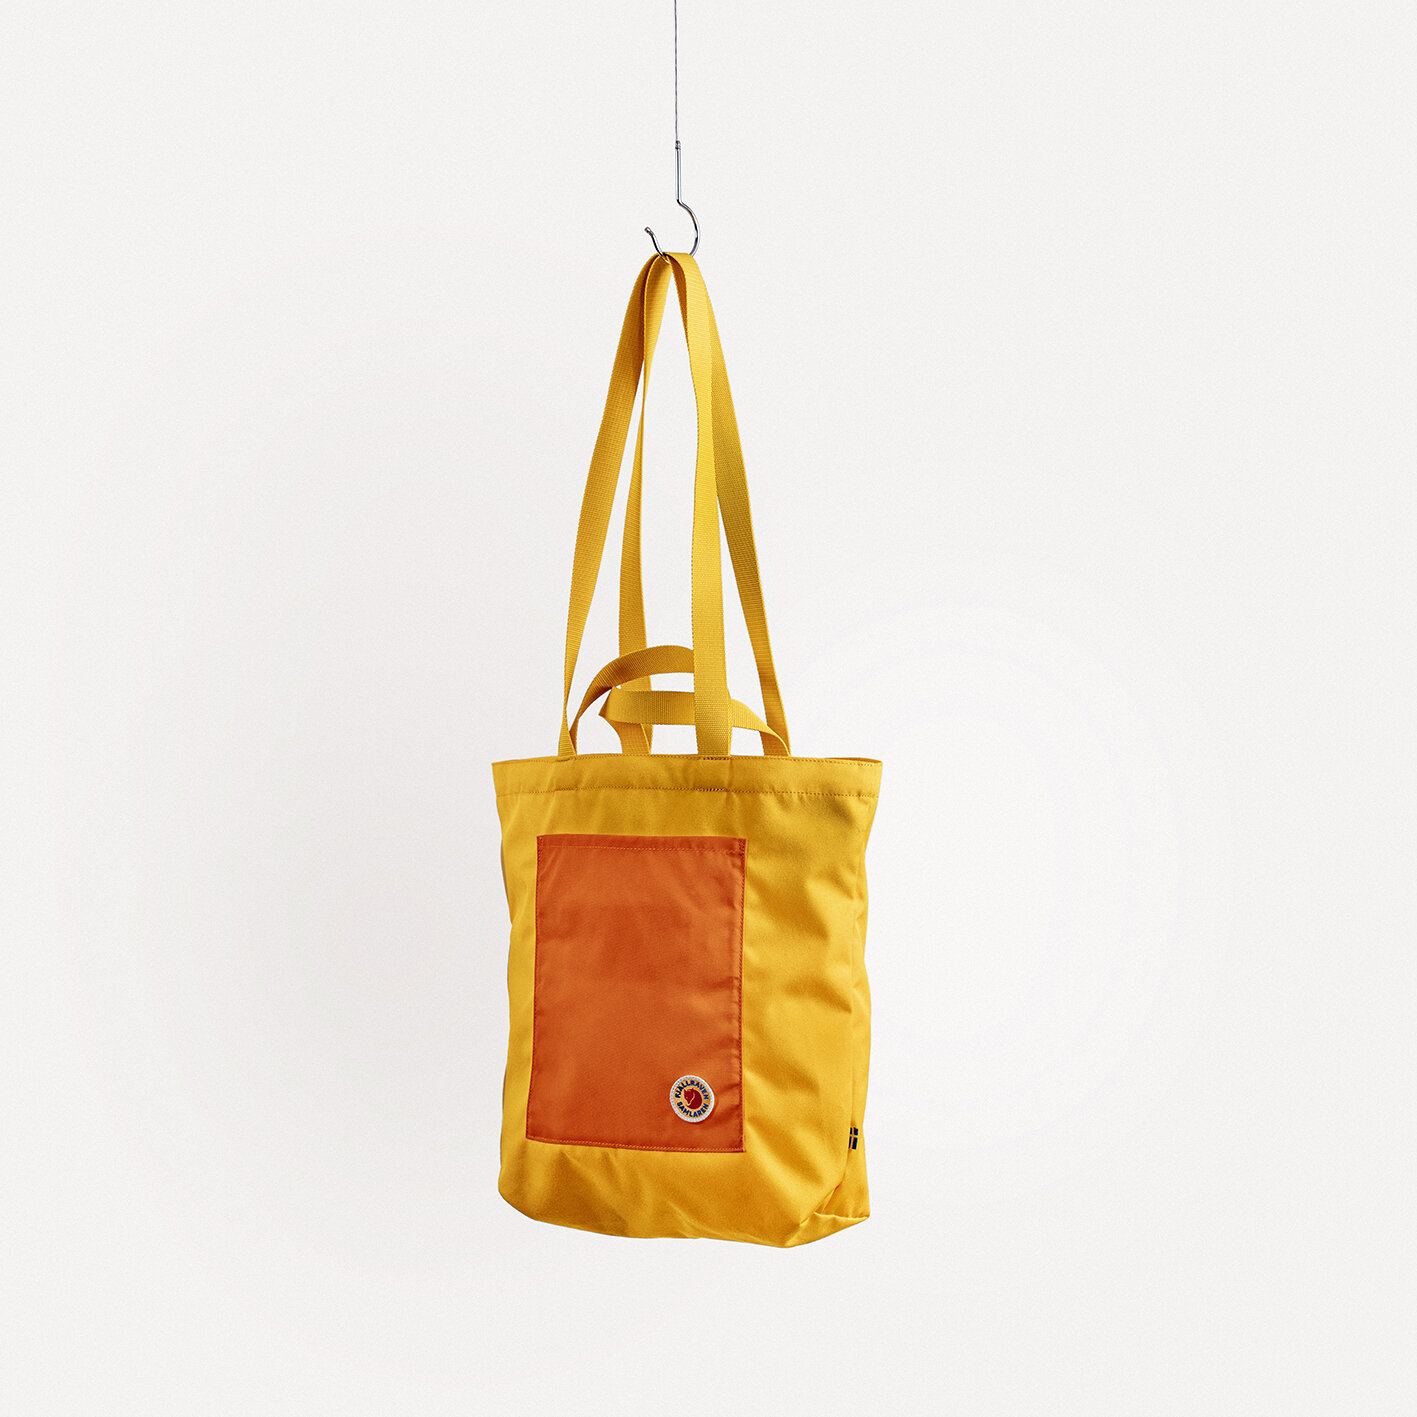 Fjällräven’s Samlaren collection: How to look good and save the planet ...